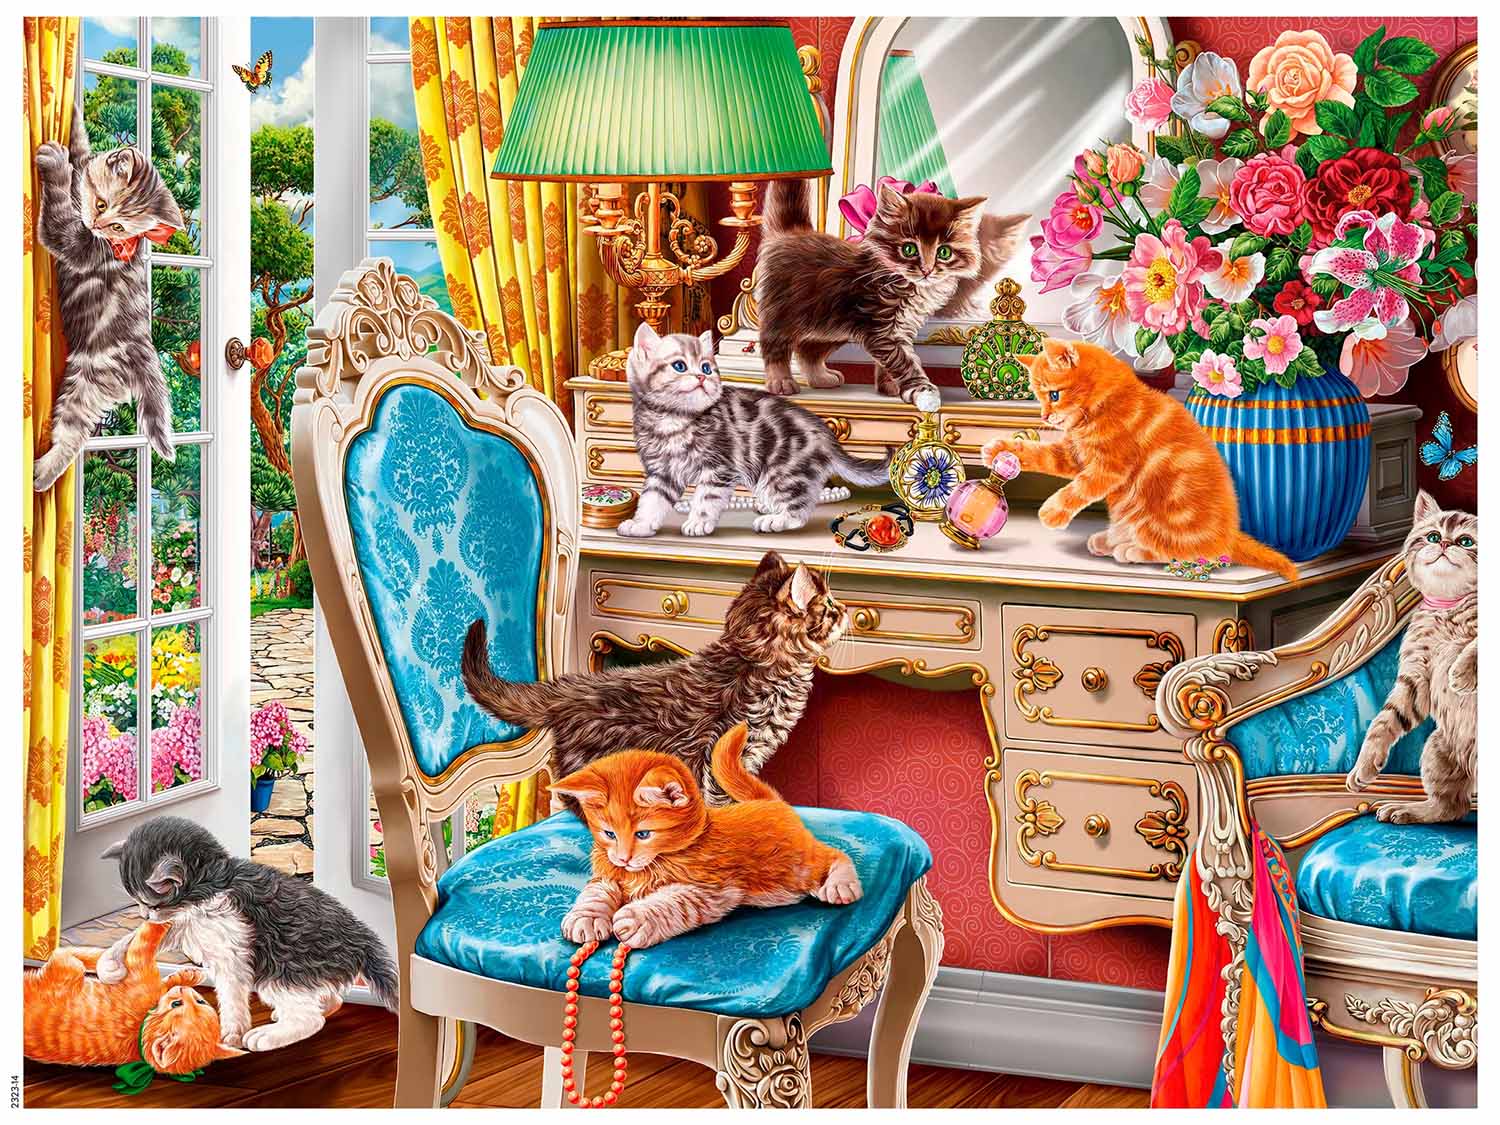 Paws Gone Wild - Kittens in the Bedroom Cats Jigsaw Puzzle